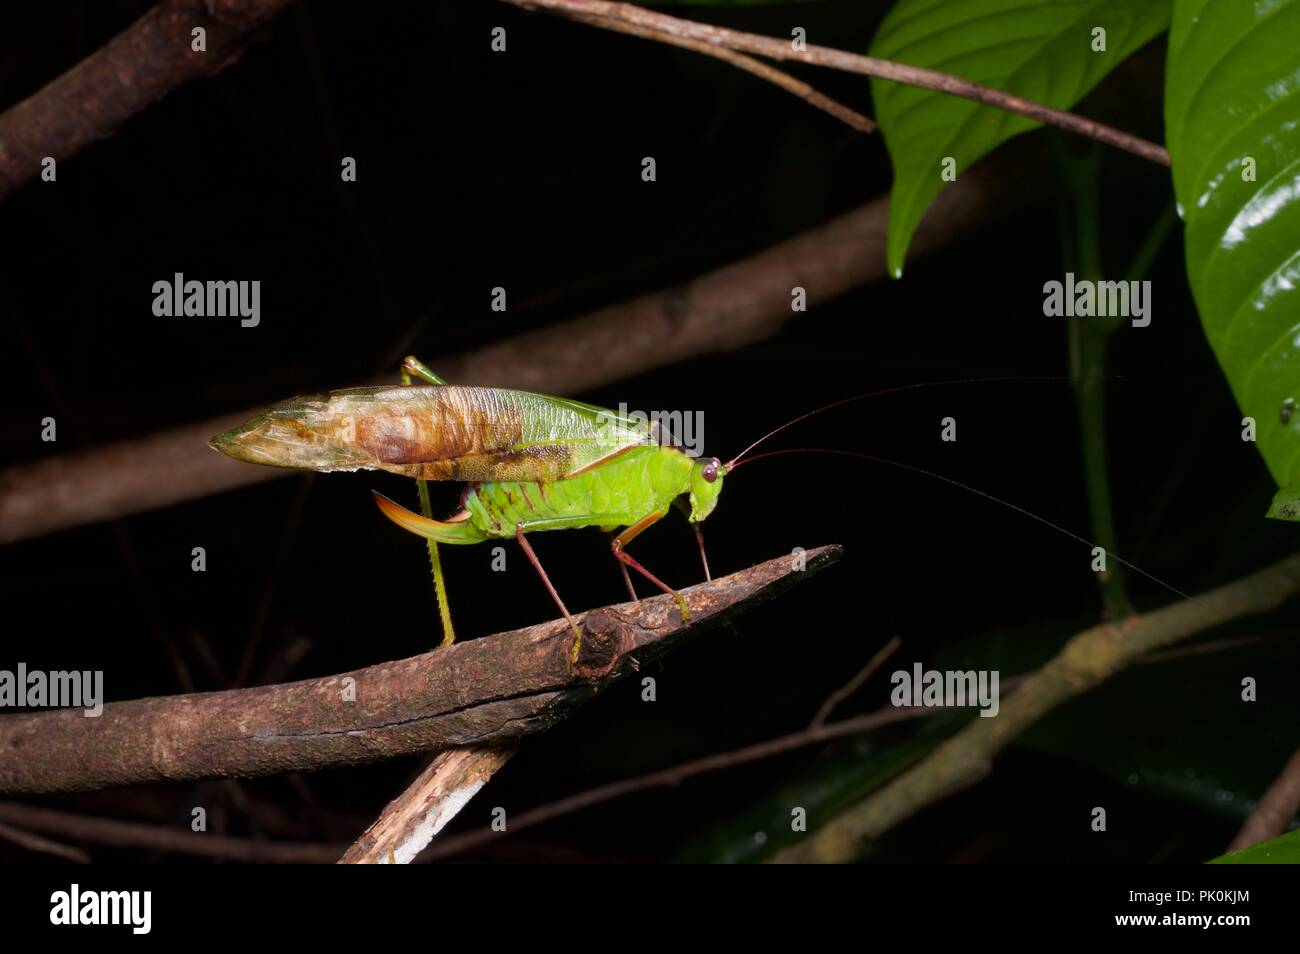 A green and brown leaf-mimic katydid in the rainforest at night in Gunung Mulu National Park, Sarawak, East Malaysia, Borneo Stock Photo